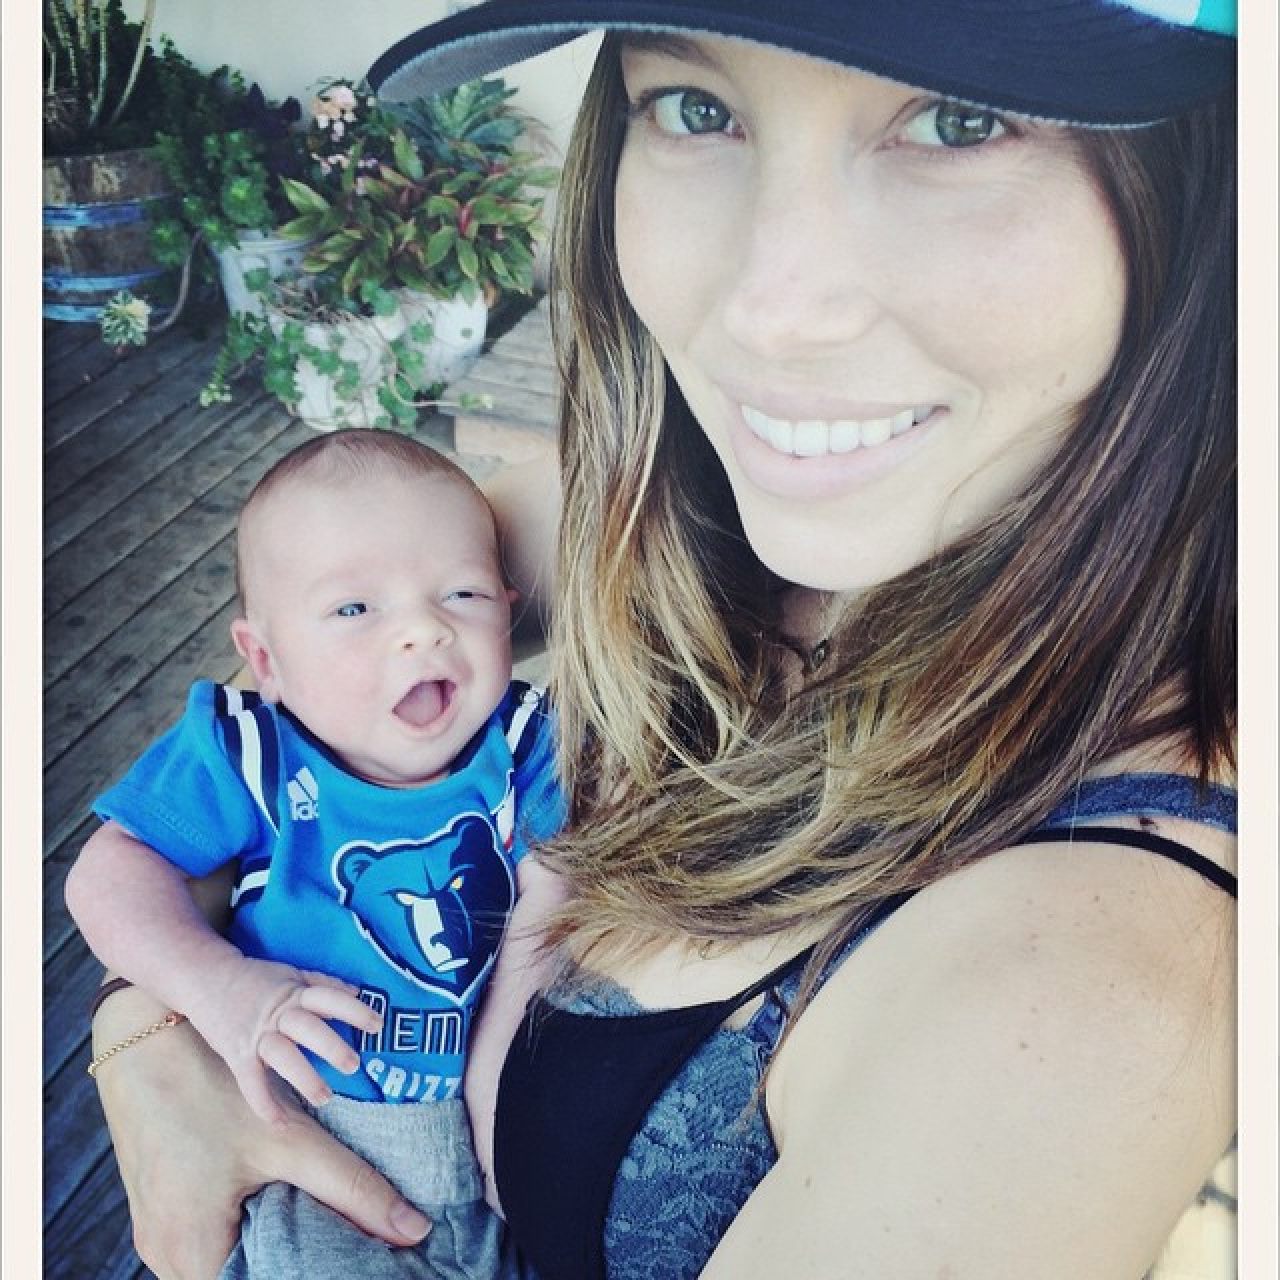 Justin Timberlake announces he, Jessica Biel have new son, Phineas 